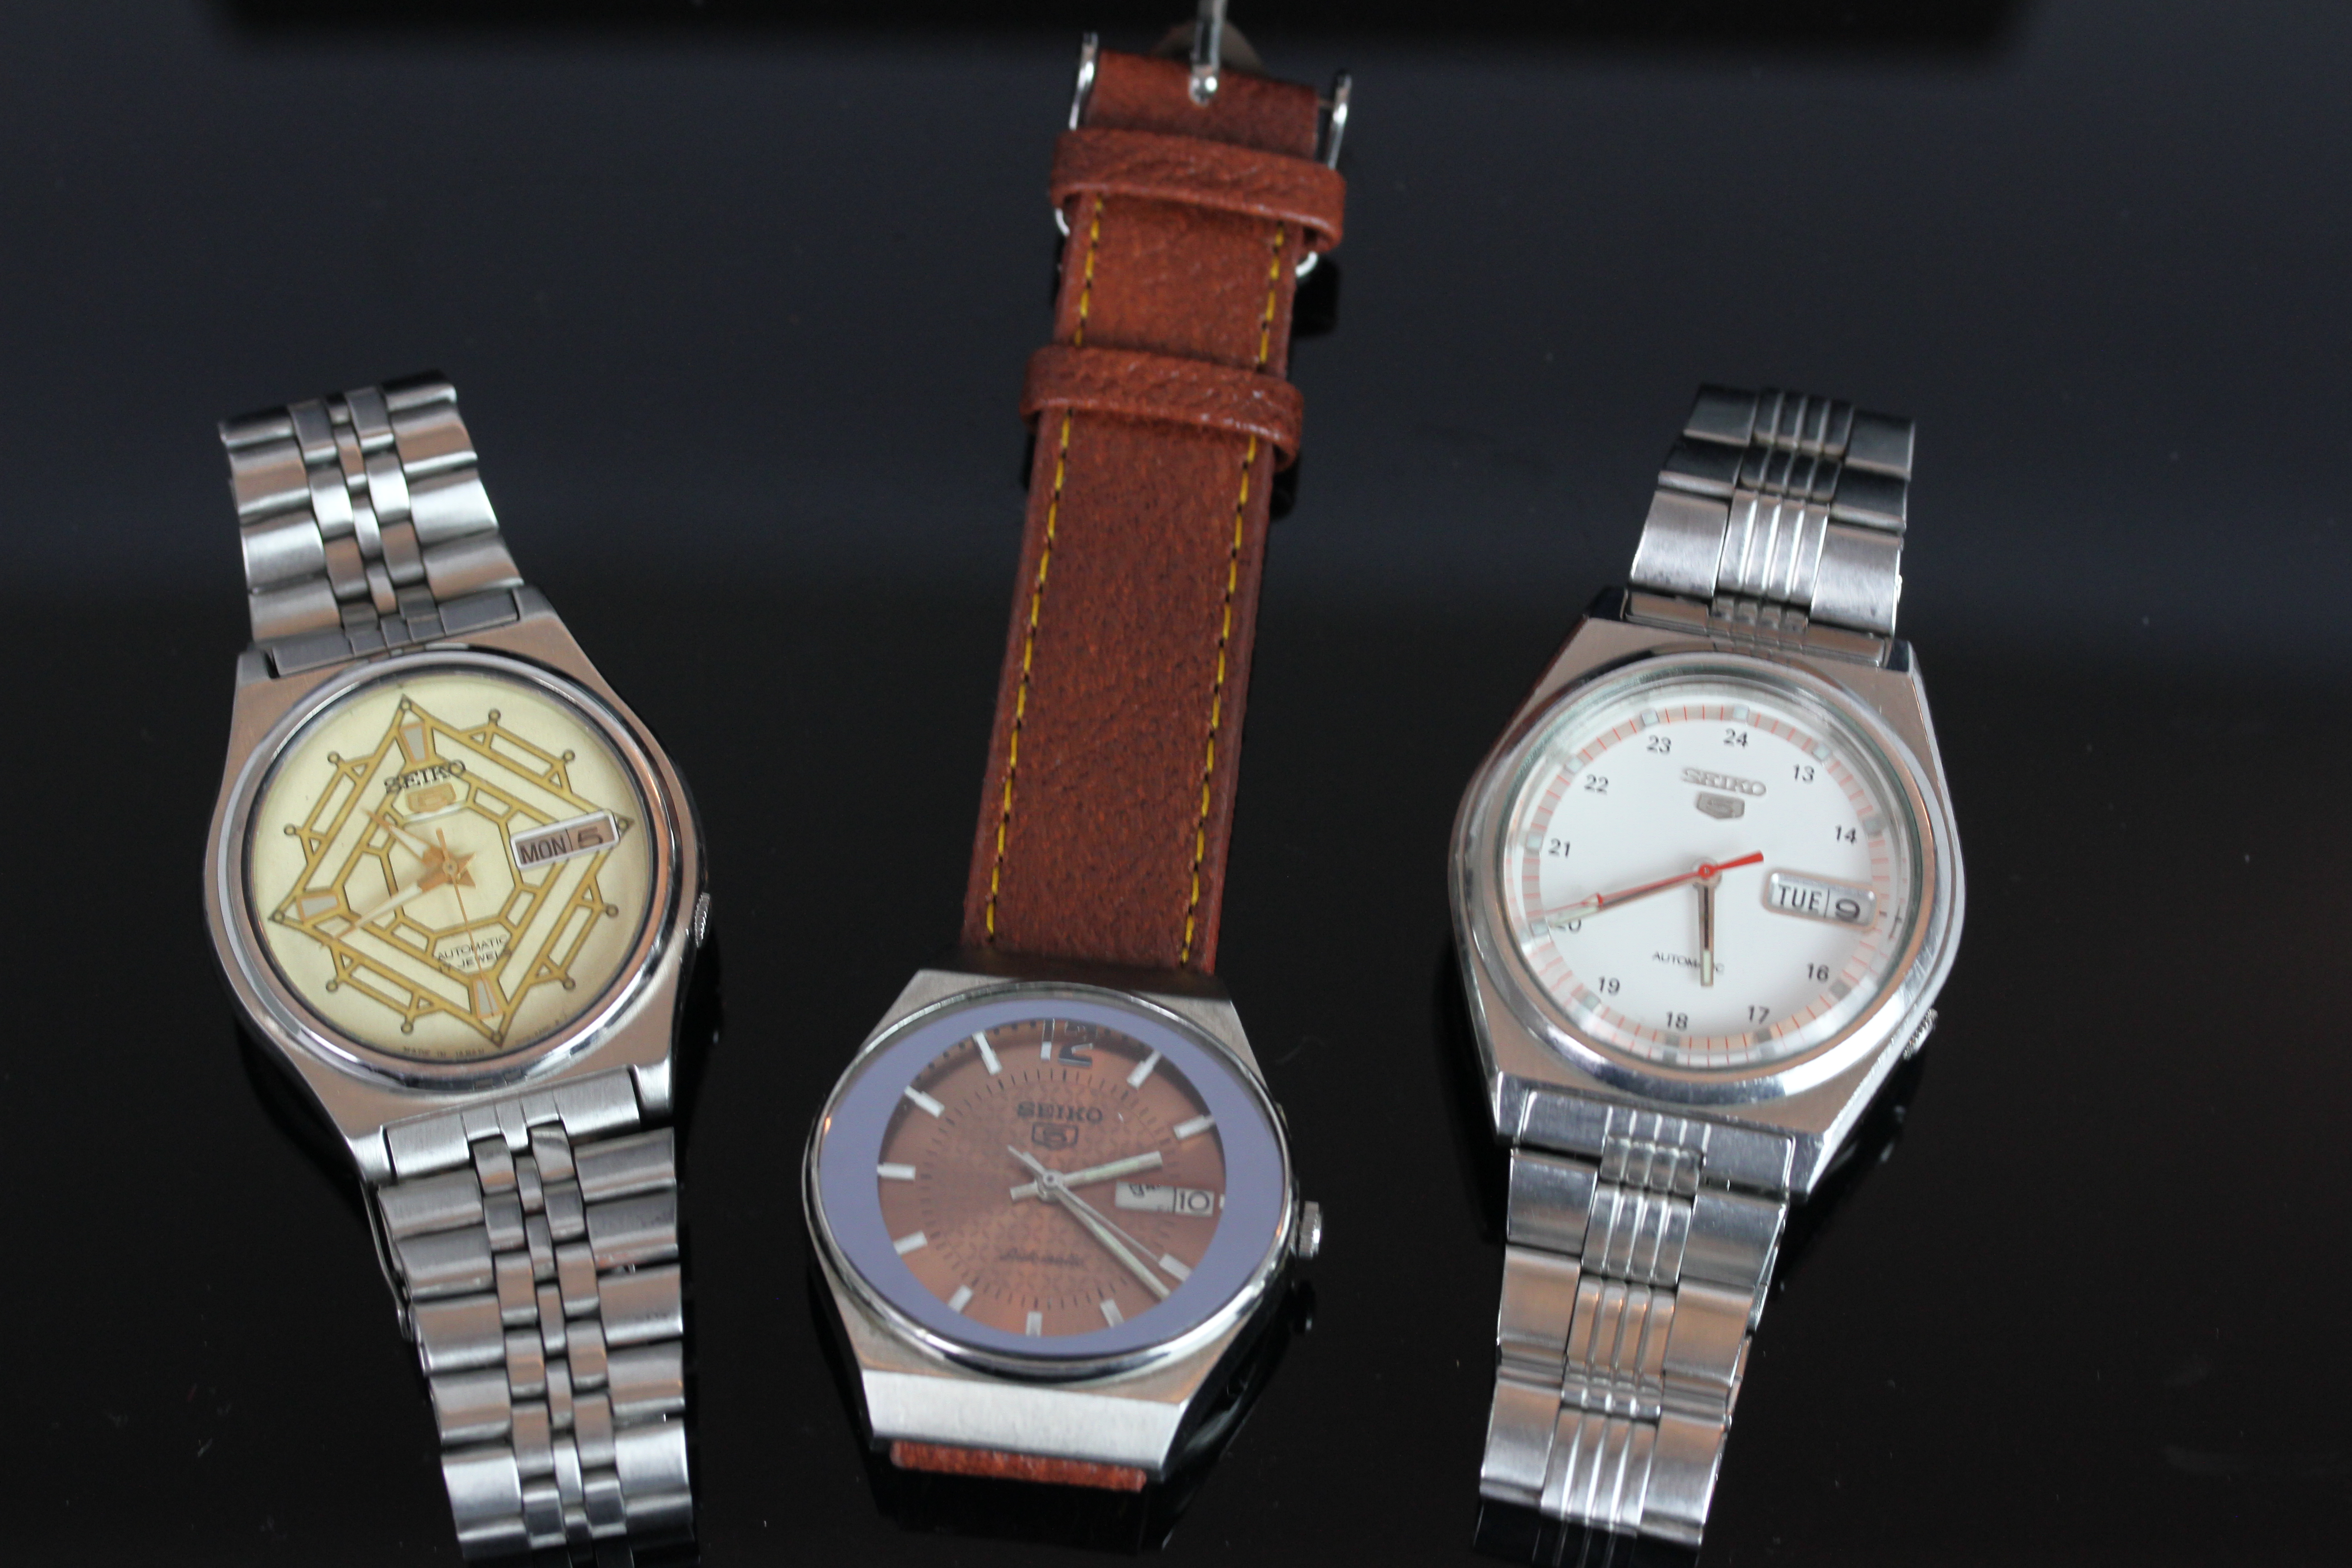 GROUP OF SEIKO 5 WRISTWATCHES, two with Seiko bracelets, all three watches are currently running.